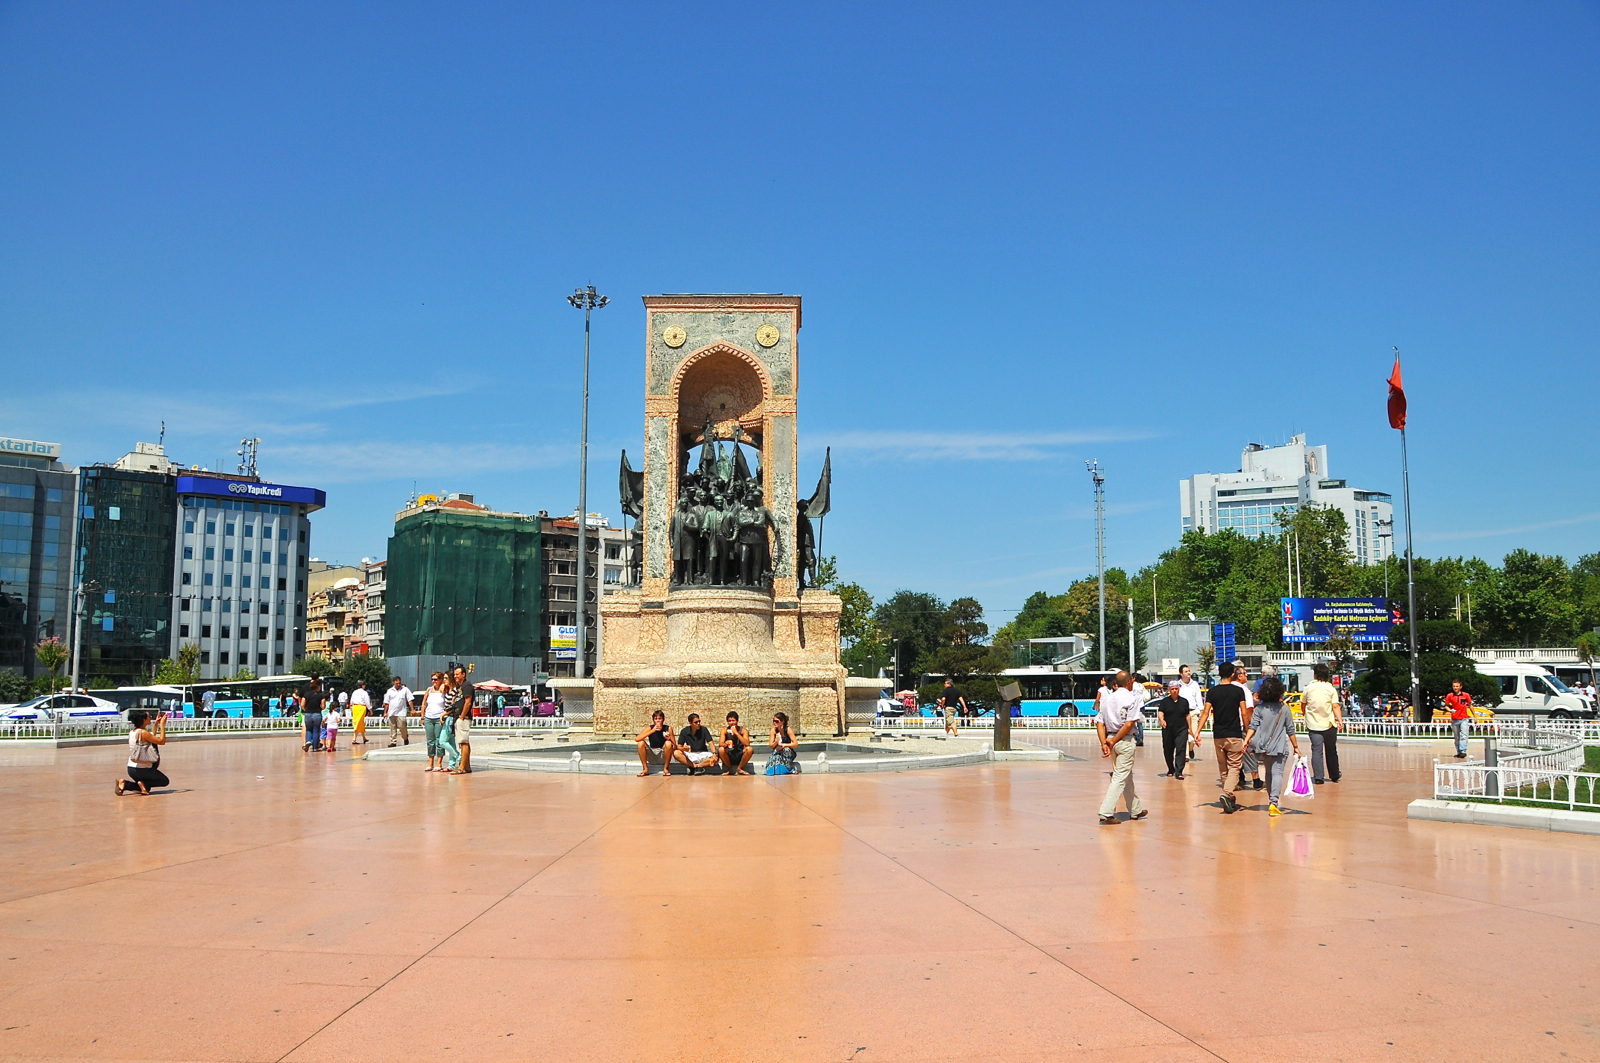 Taksim square, the Heart and Soul of Istanbul, Turkey